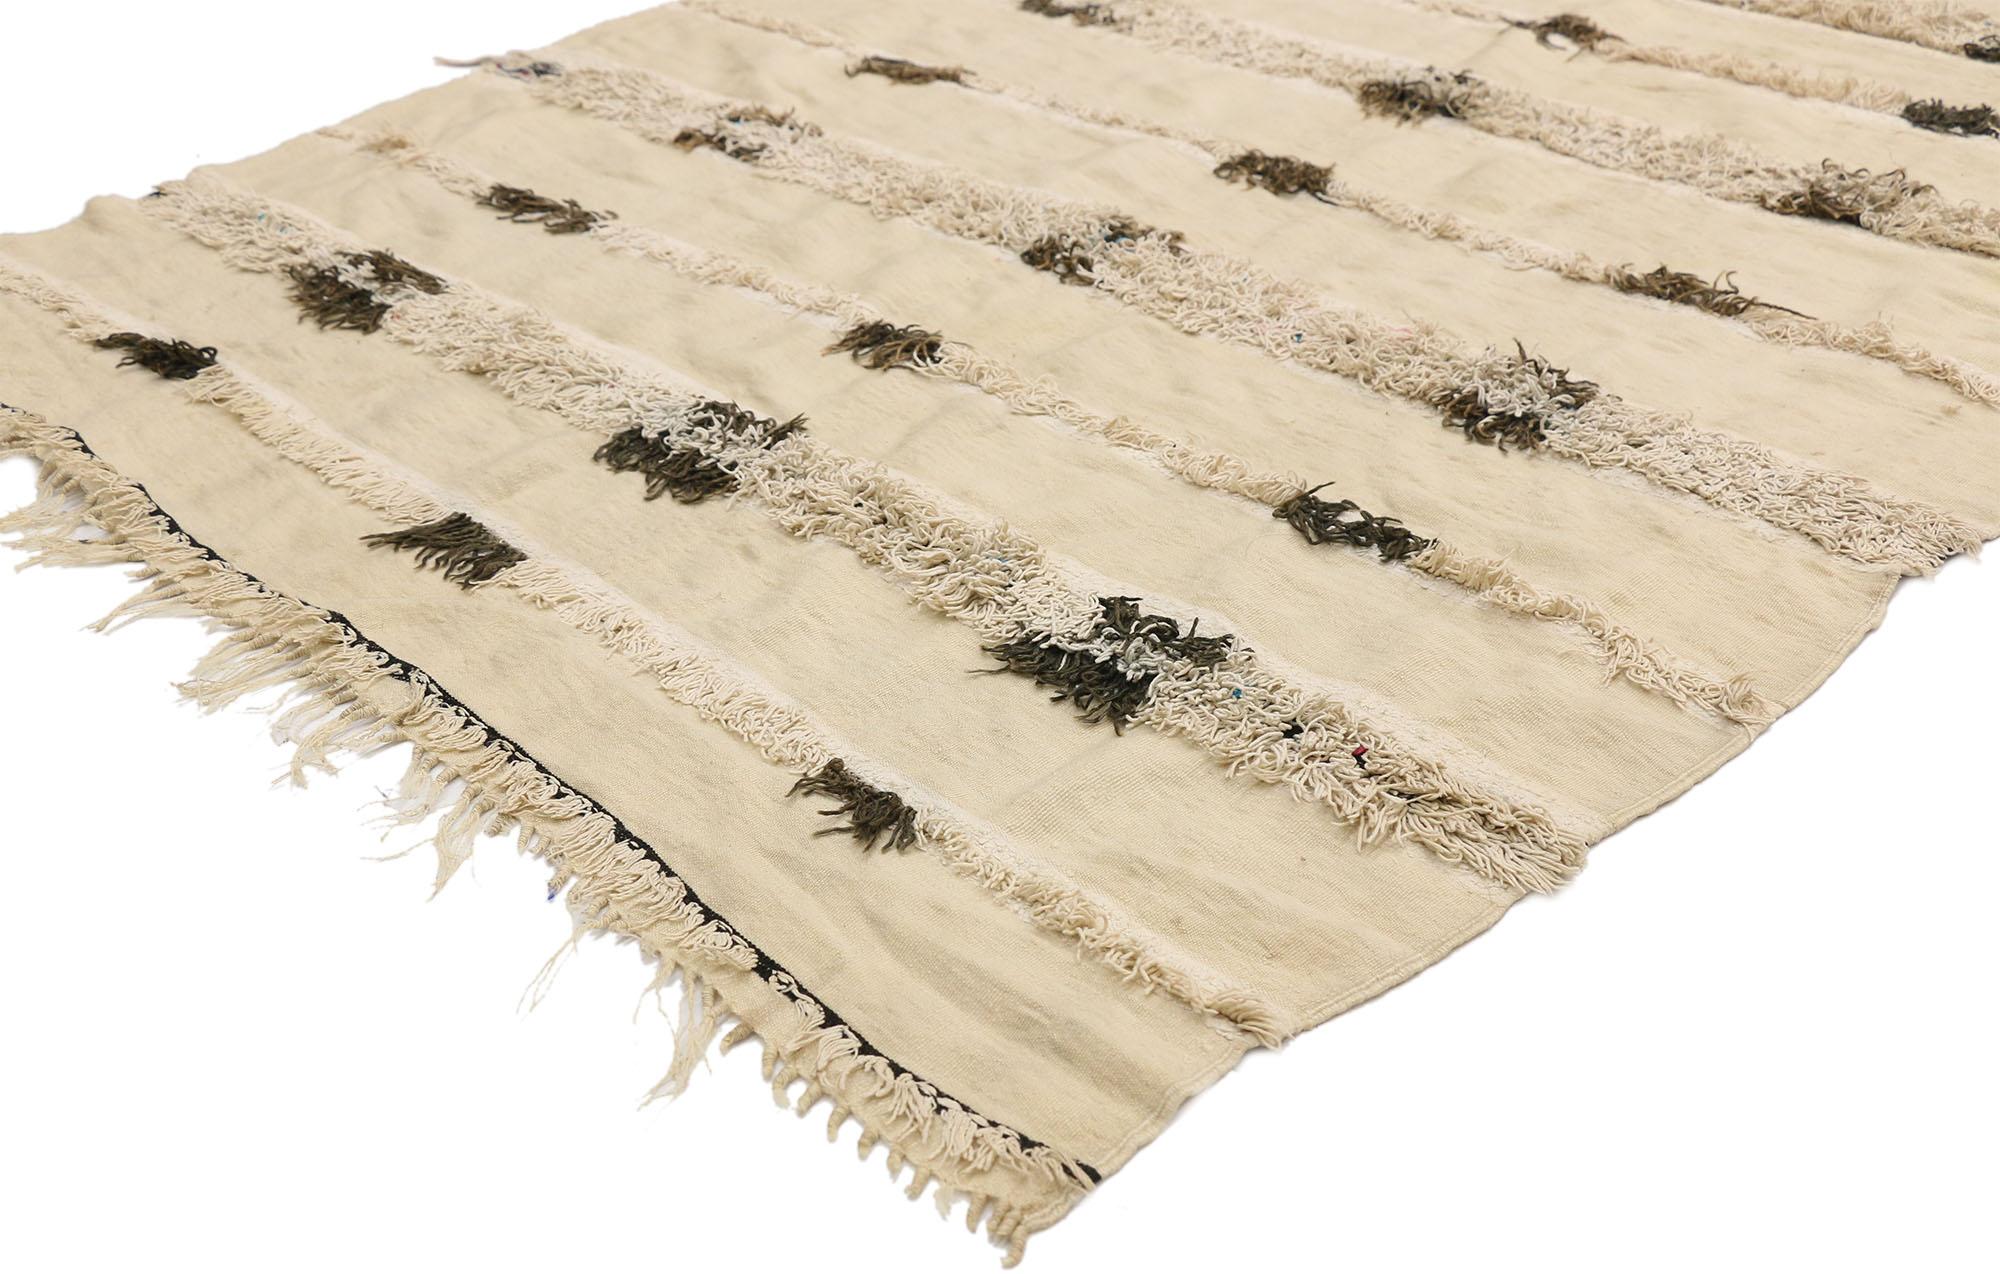 20823, vintage Moroccan wedding blanket, Berber Handira Tamizart. This handwoven wool vintage Moroccan Wedding Blanket also known as a Berber Handira features rows of fluffy fringe embellished with accent colors. The underside of this vintage